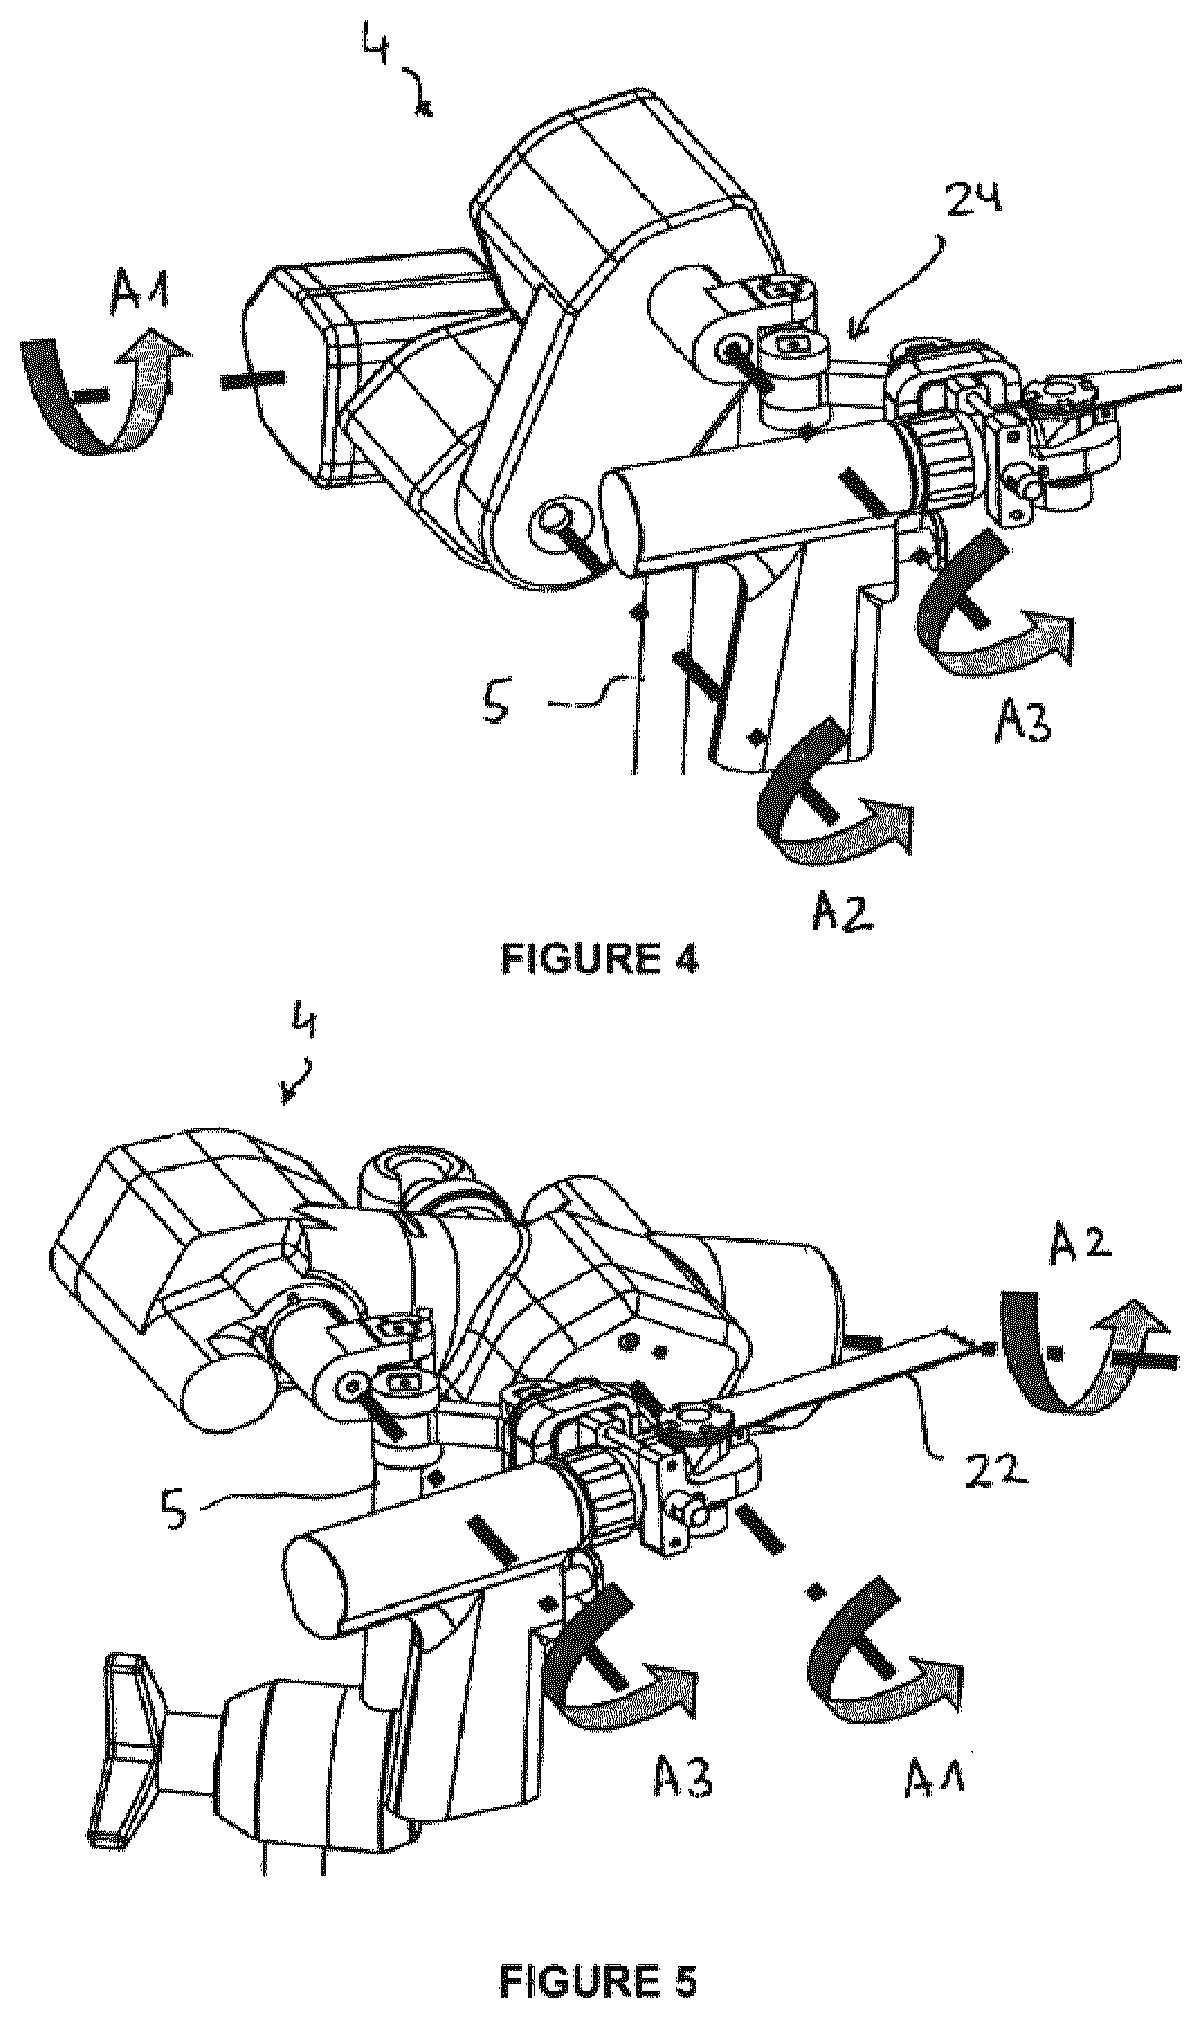 Surgical system for cutting an anatomical structure according to at least one target plane